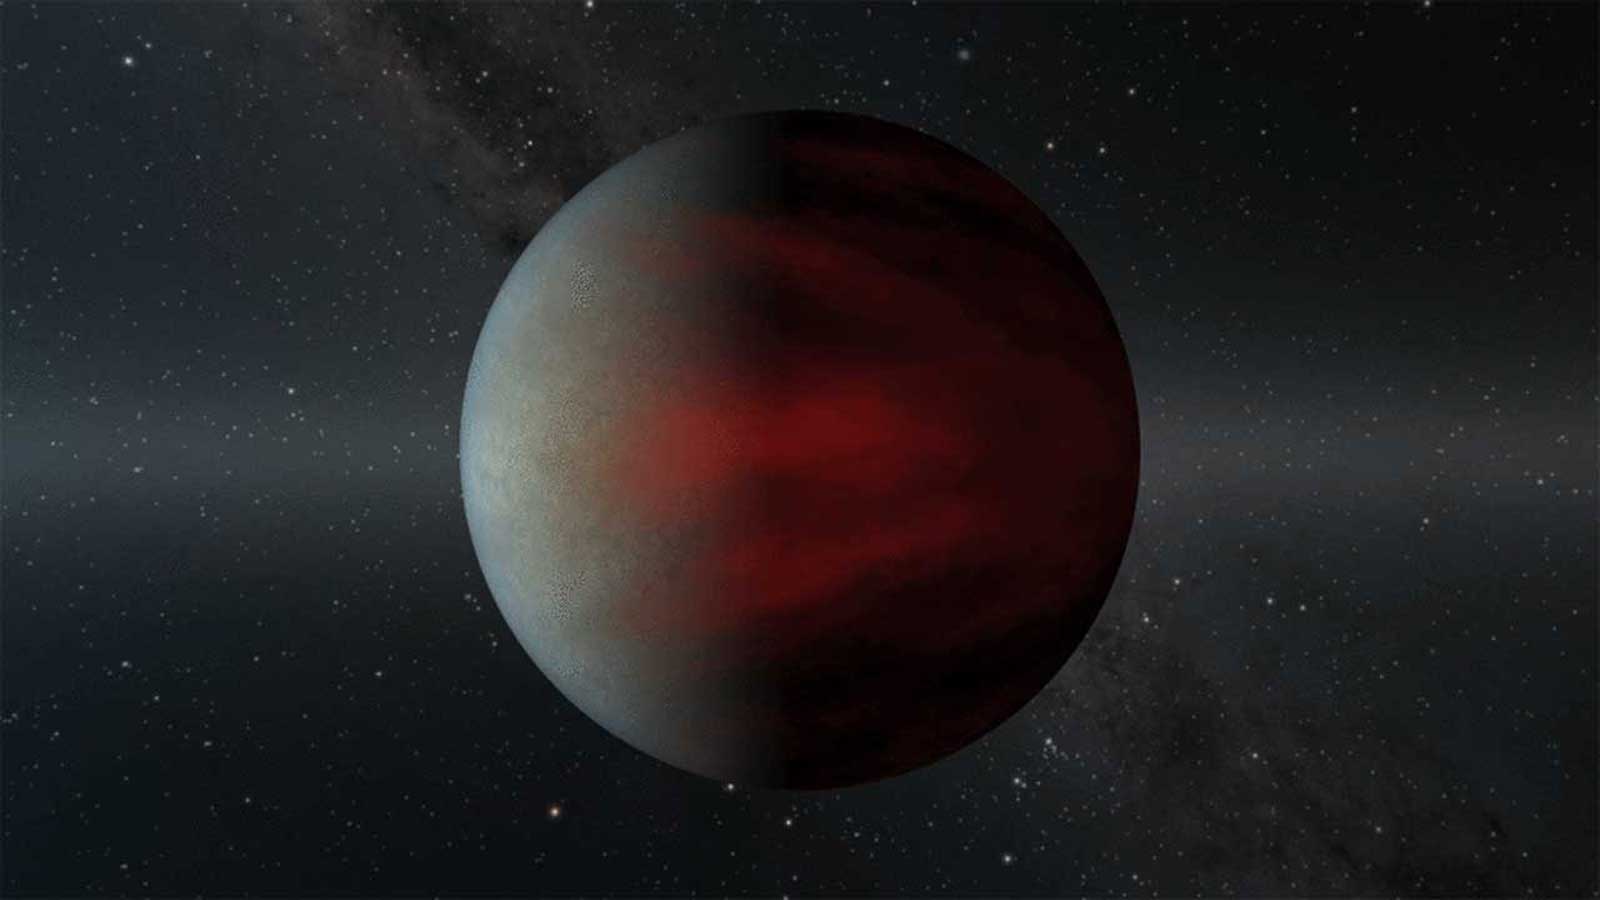 slide 4 - Young Hot Jupiter Offers Clues to Formation of Exotic Worlds